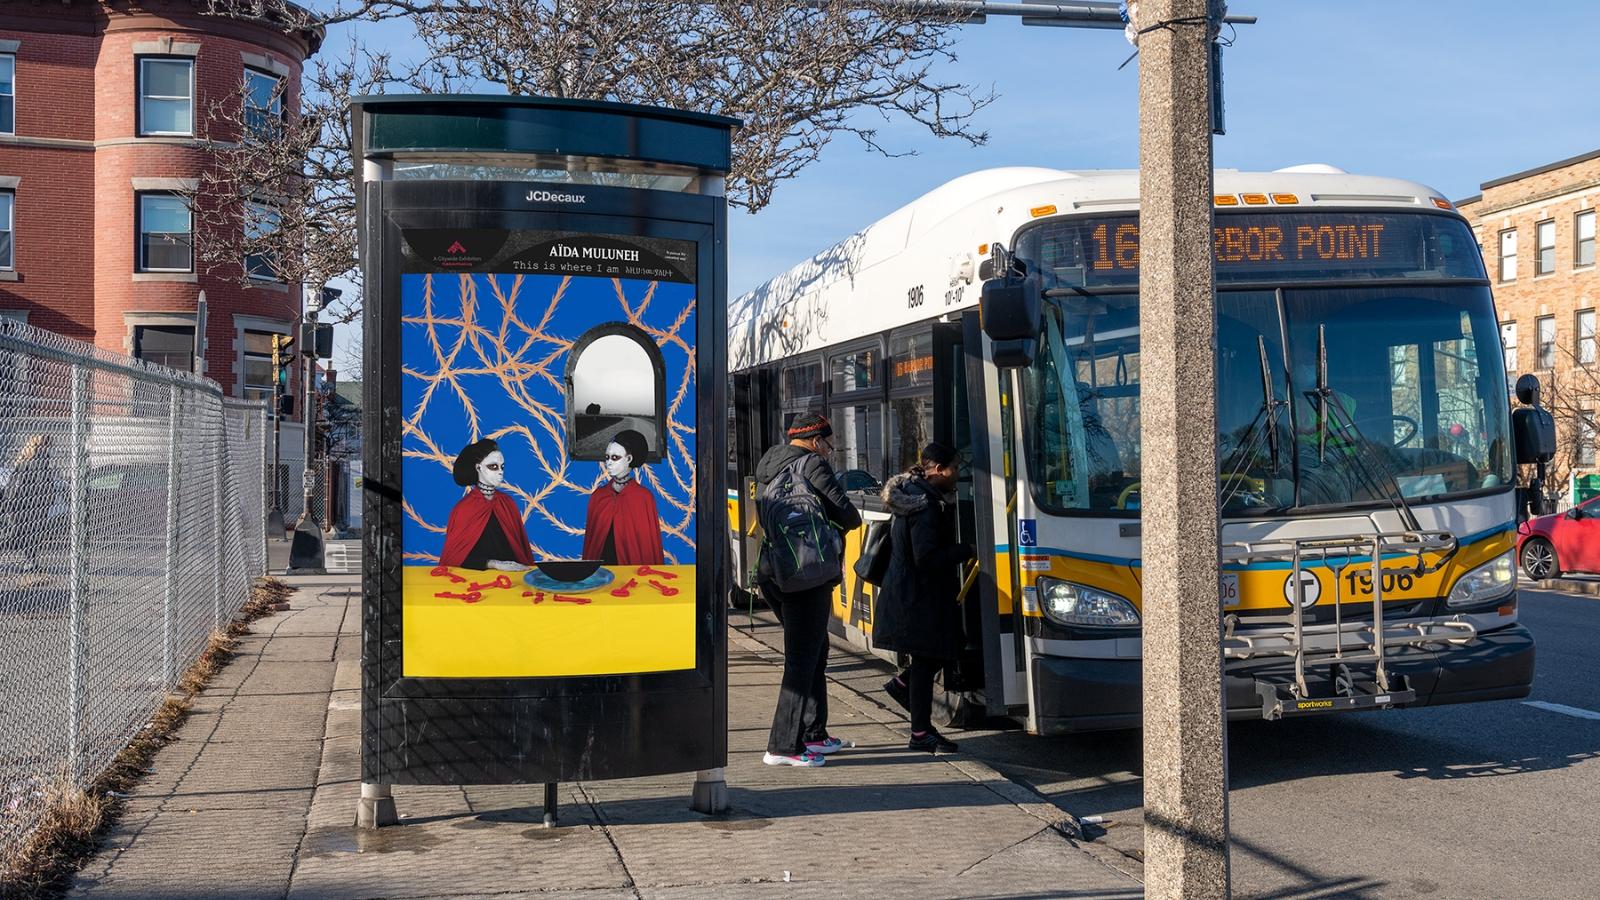 Aïda Muluneh's "To pursue the ceaseless way," is exhibited on a bus stop in the Boston area. The photograph is part of "This is where I am," presented by New York-based Public Art Fund.